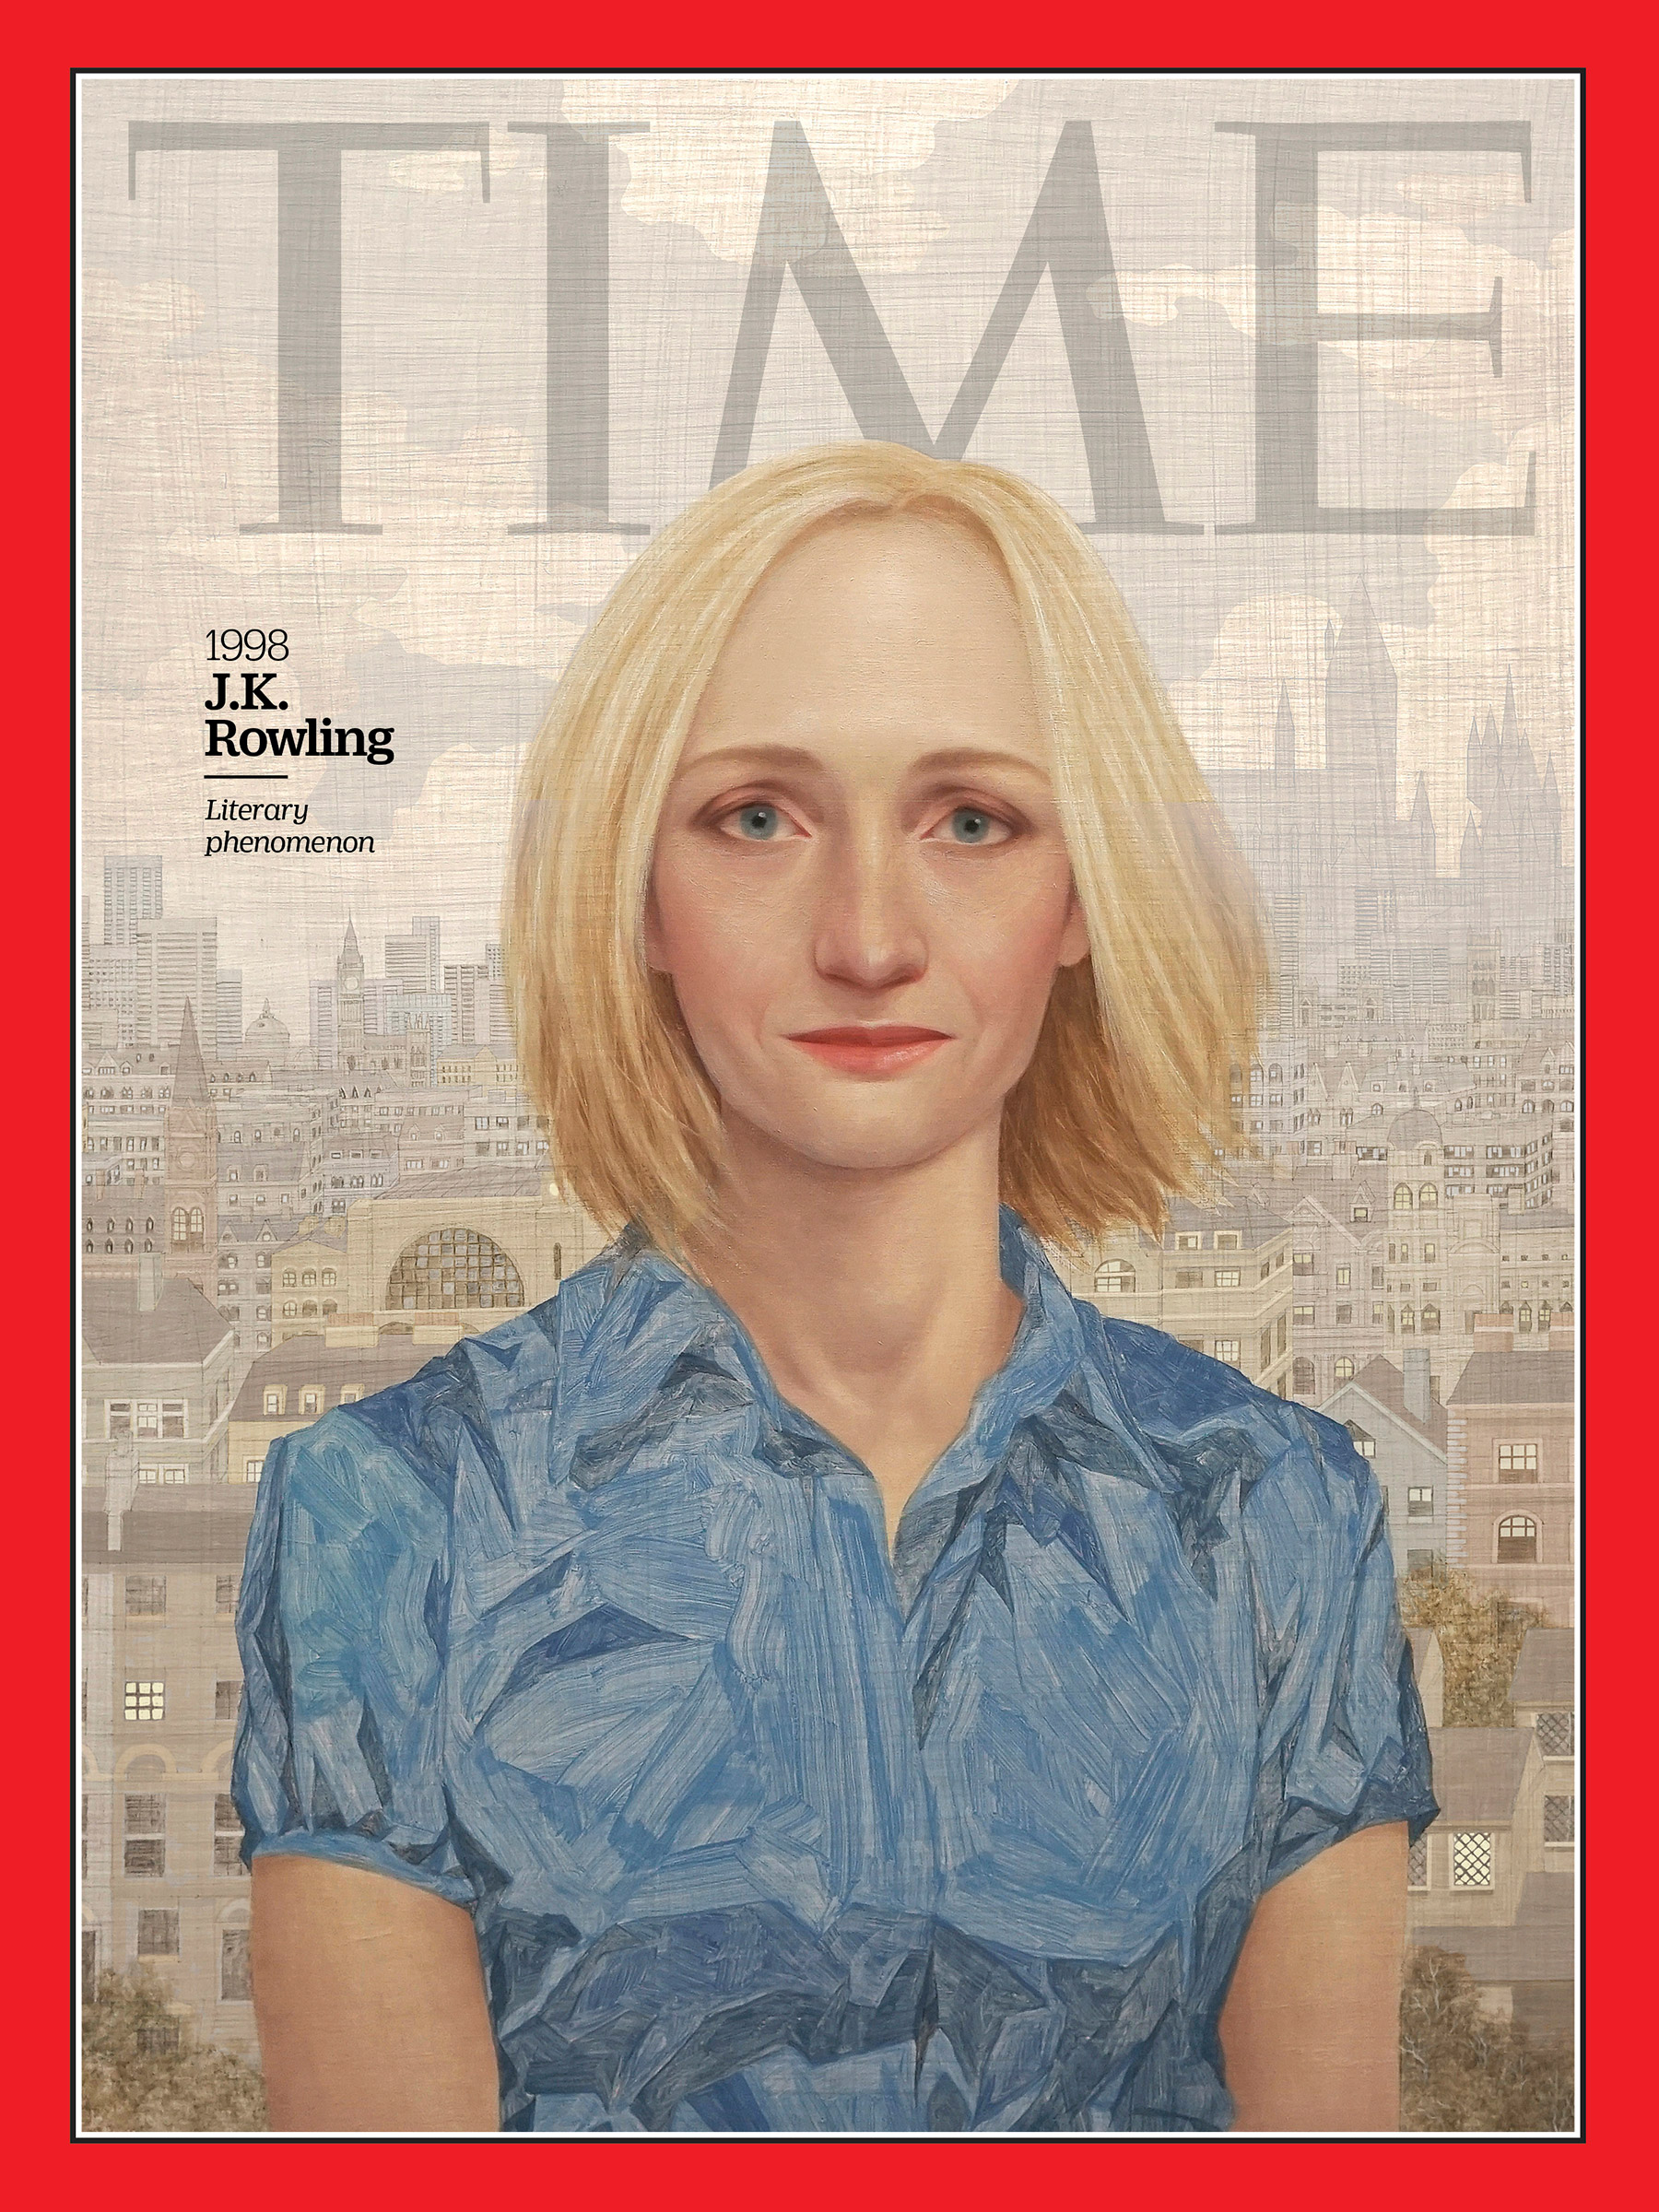 <a href="https://fineartamerica.com/featured/jk-rowling-1998-time.html"><strong>Buy the cover art→</strong></a> (Illustration by Lu Cong for TIME)